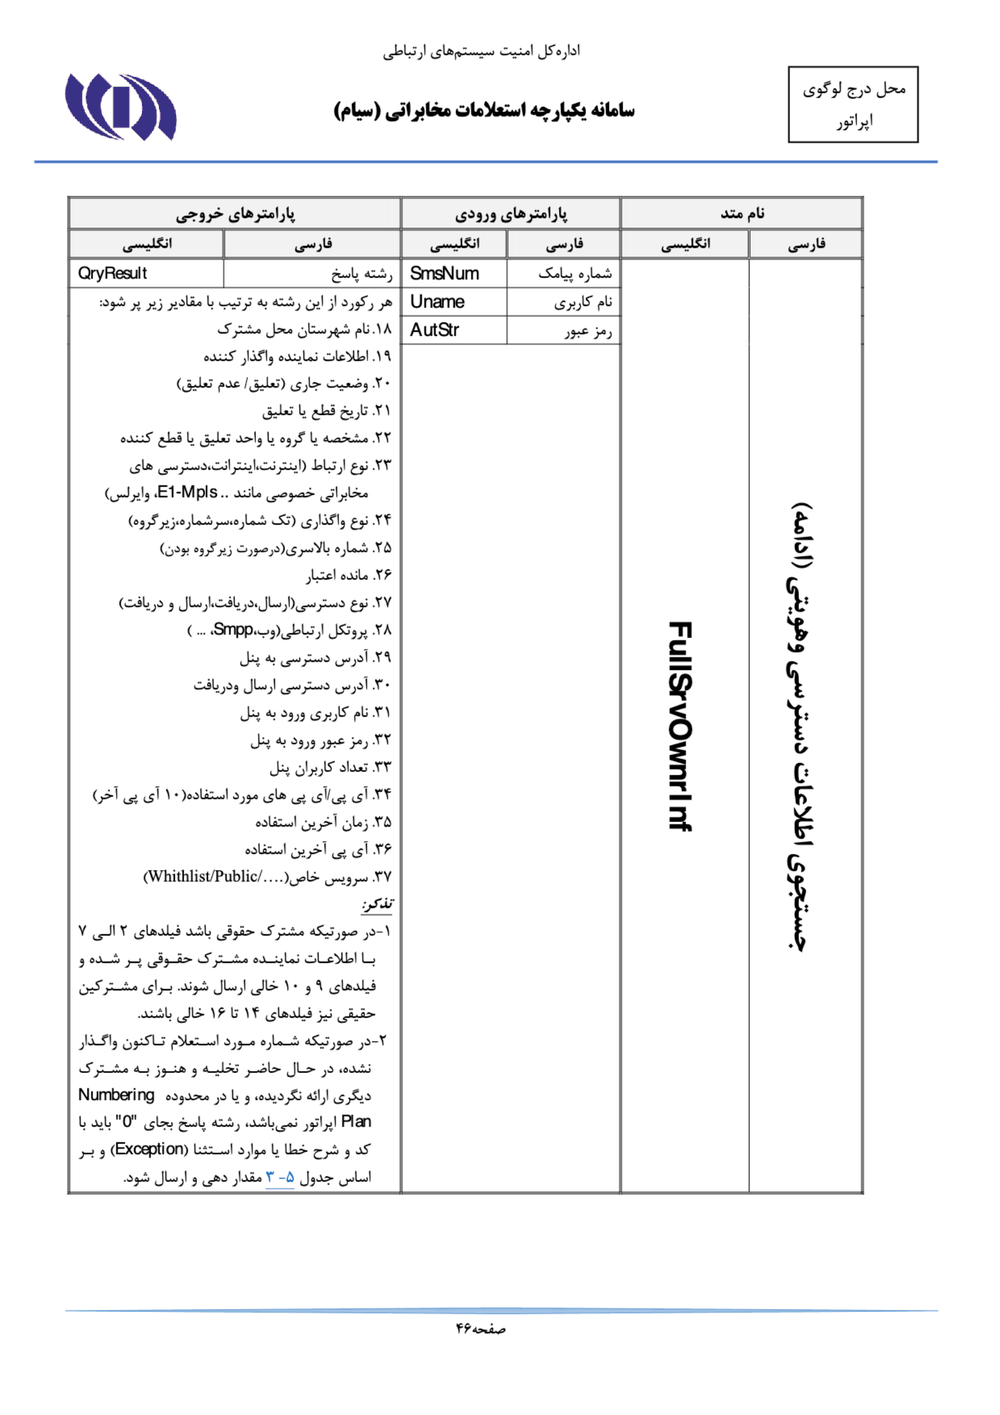 Page 46 from Iran’s SIAM Manual in Persian for Tracking and Controlling Mobile Phones